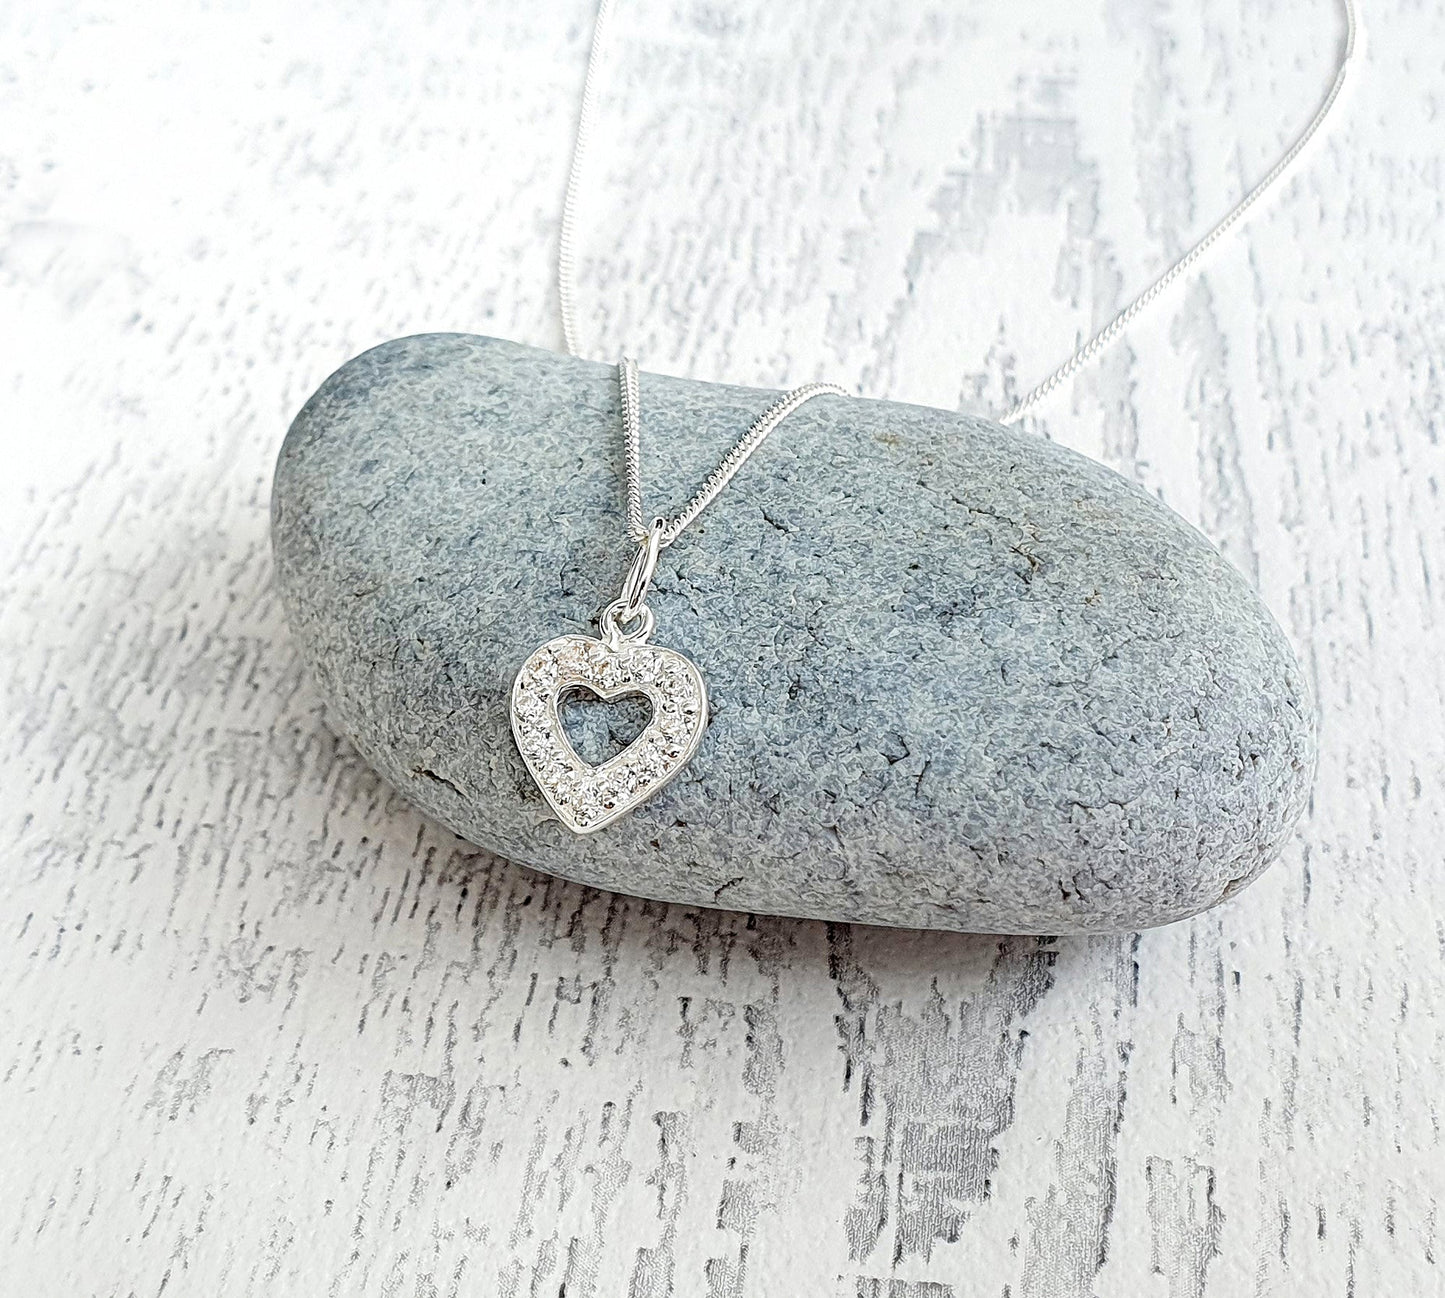 Goddaughter Heart Necklace with Cubic Zirconia in Sterling Silver 925, Personalised Gift